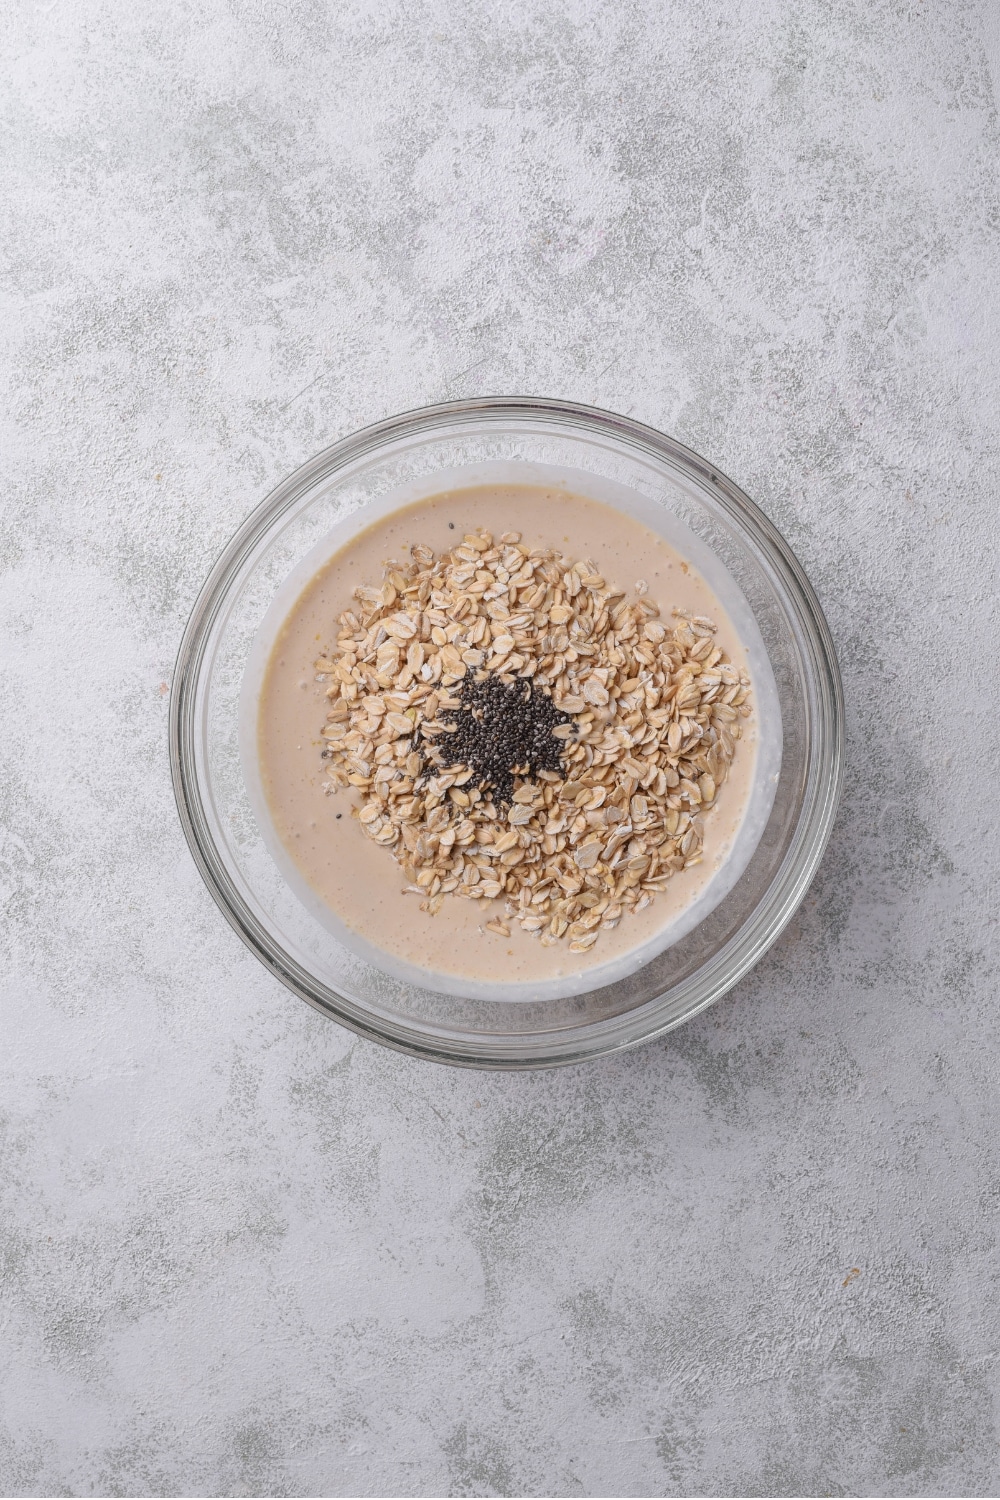 A glass bowl filled with a milk and yogurt mixture, with oats and chia seeds on top.